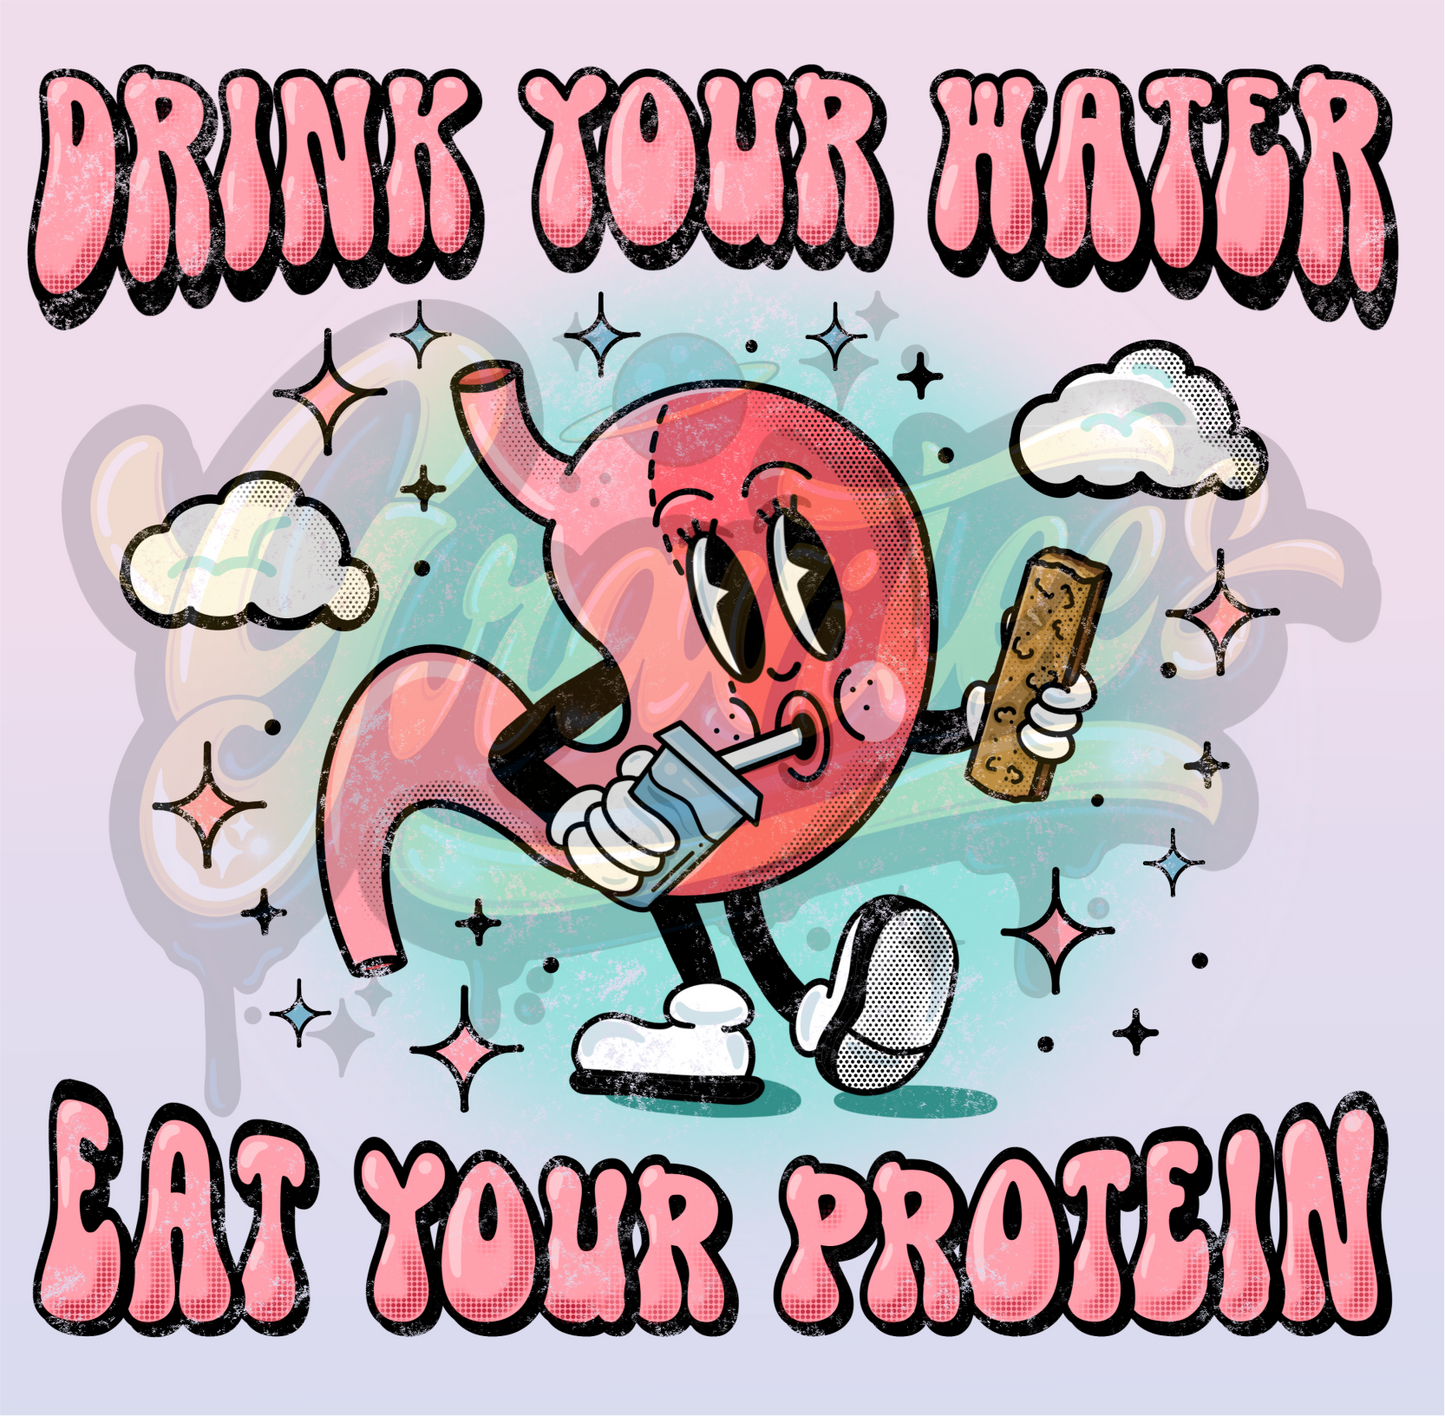 Drink Your Water Eat Your Protein PNG, Bariatric Sleeve Vsg Clipart for DTF or Shirt Printing, PNG Only!